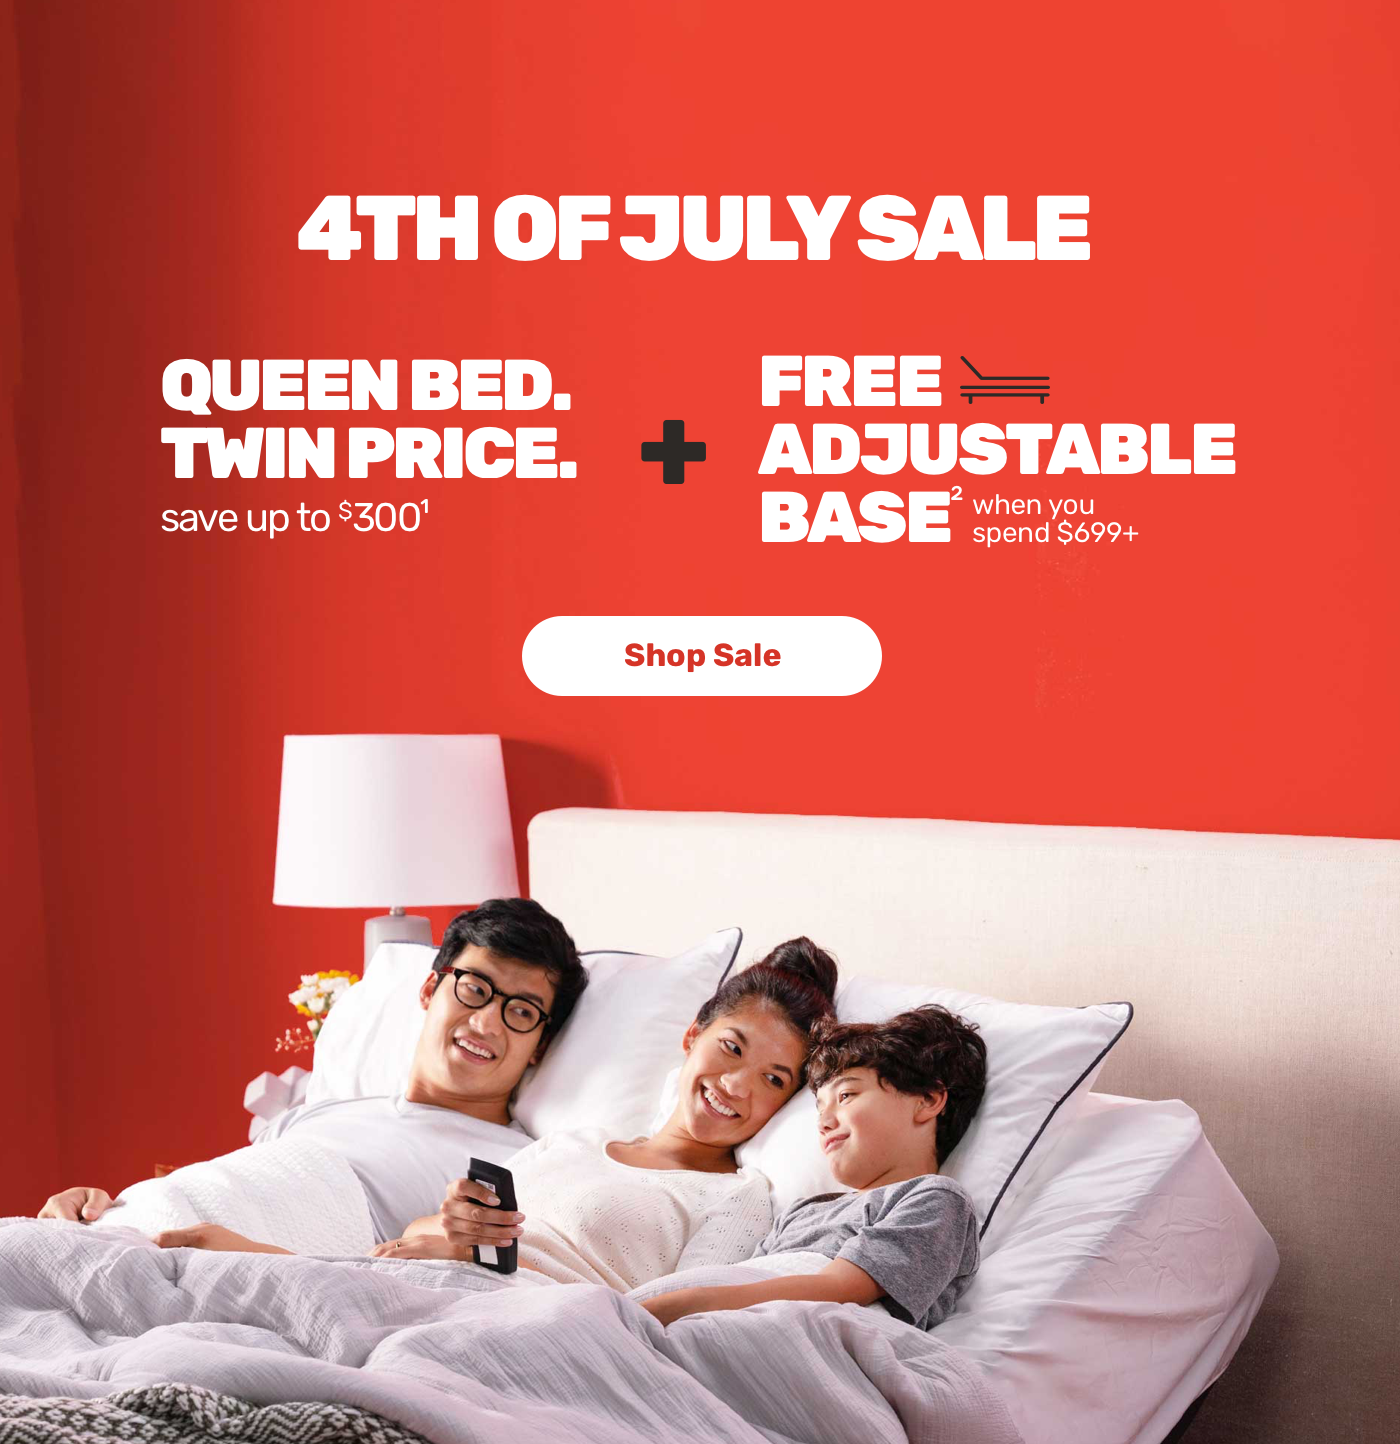 4th Of july sale Queen Bed Twin Price save upto $300 + Free Adjustable base when you spend $699 Shop Sale